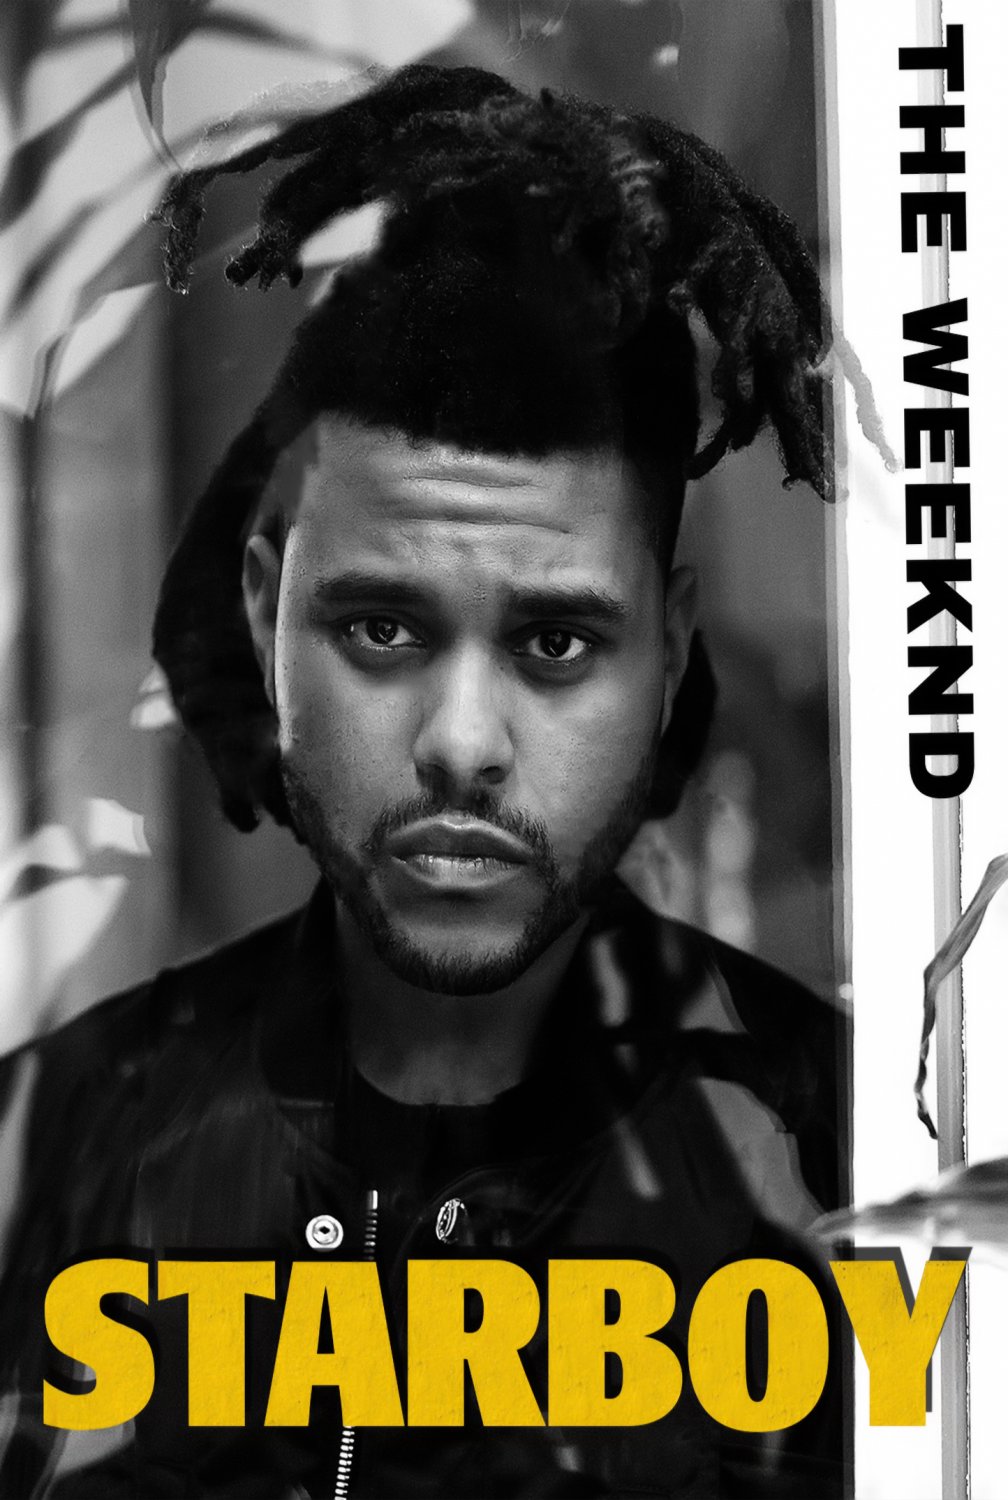 The Weeknd  13"x19" (32cm/49cm) Poster